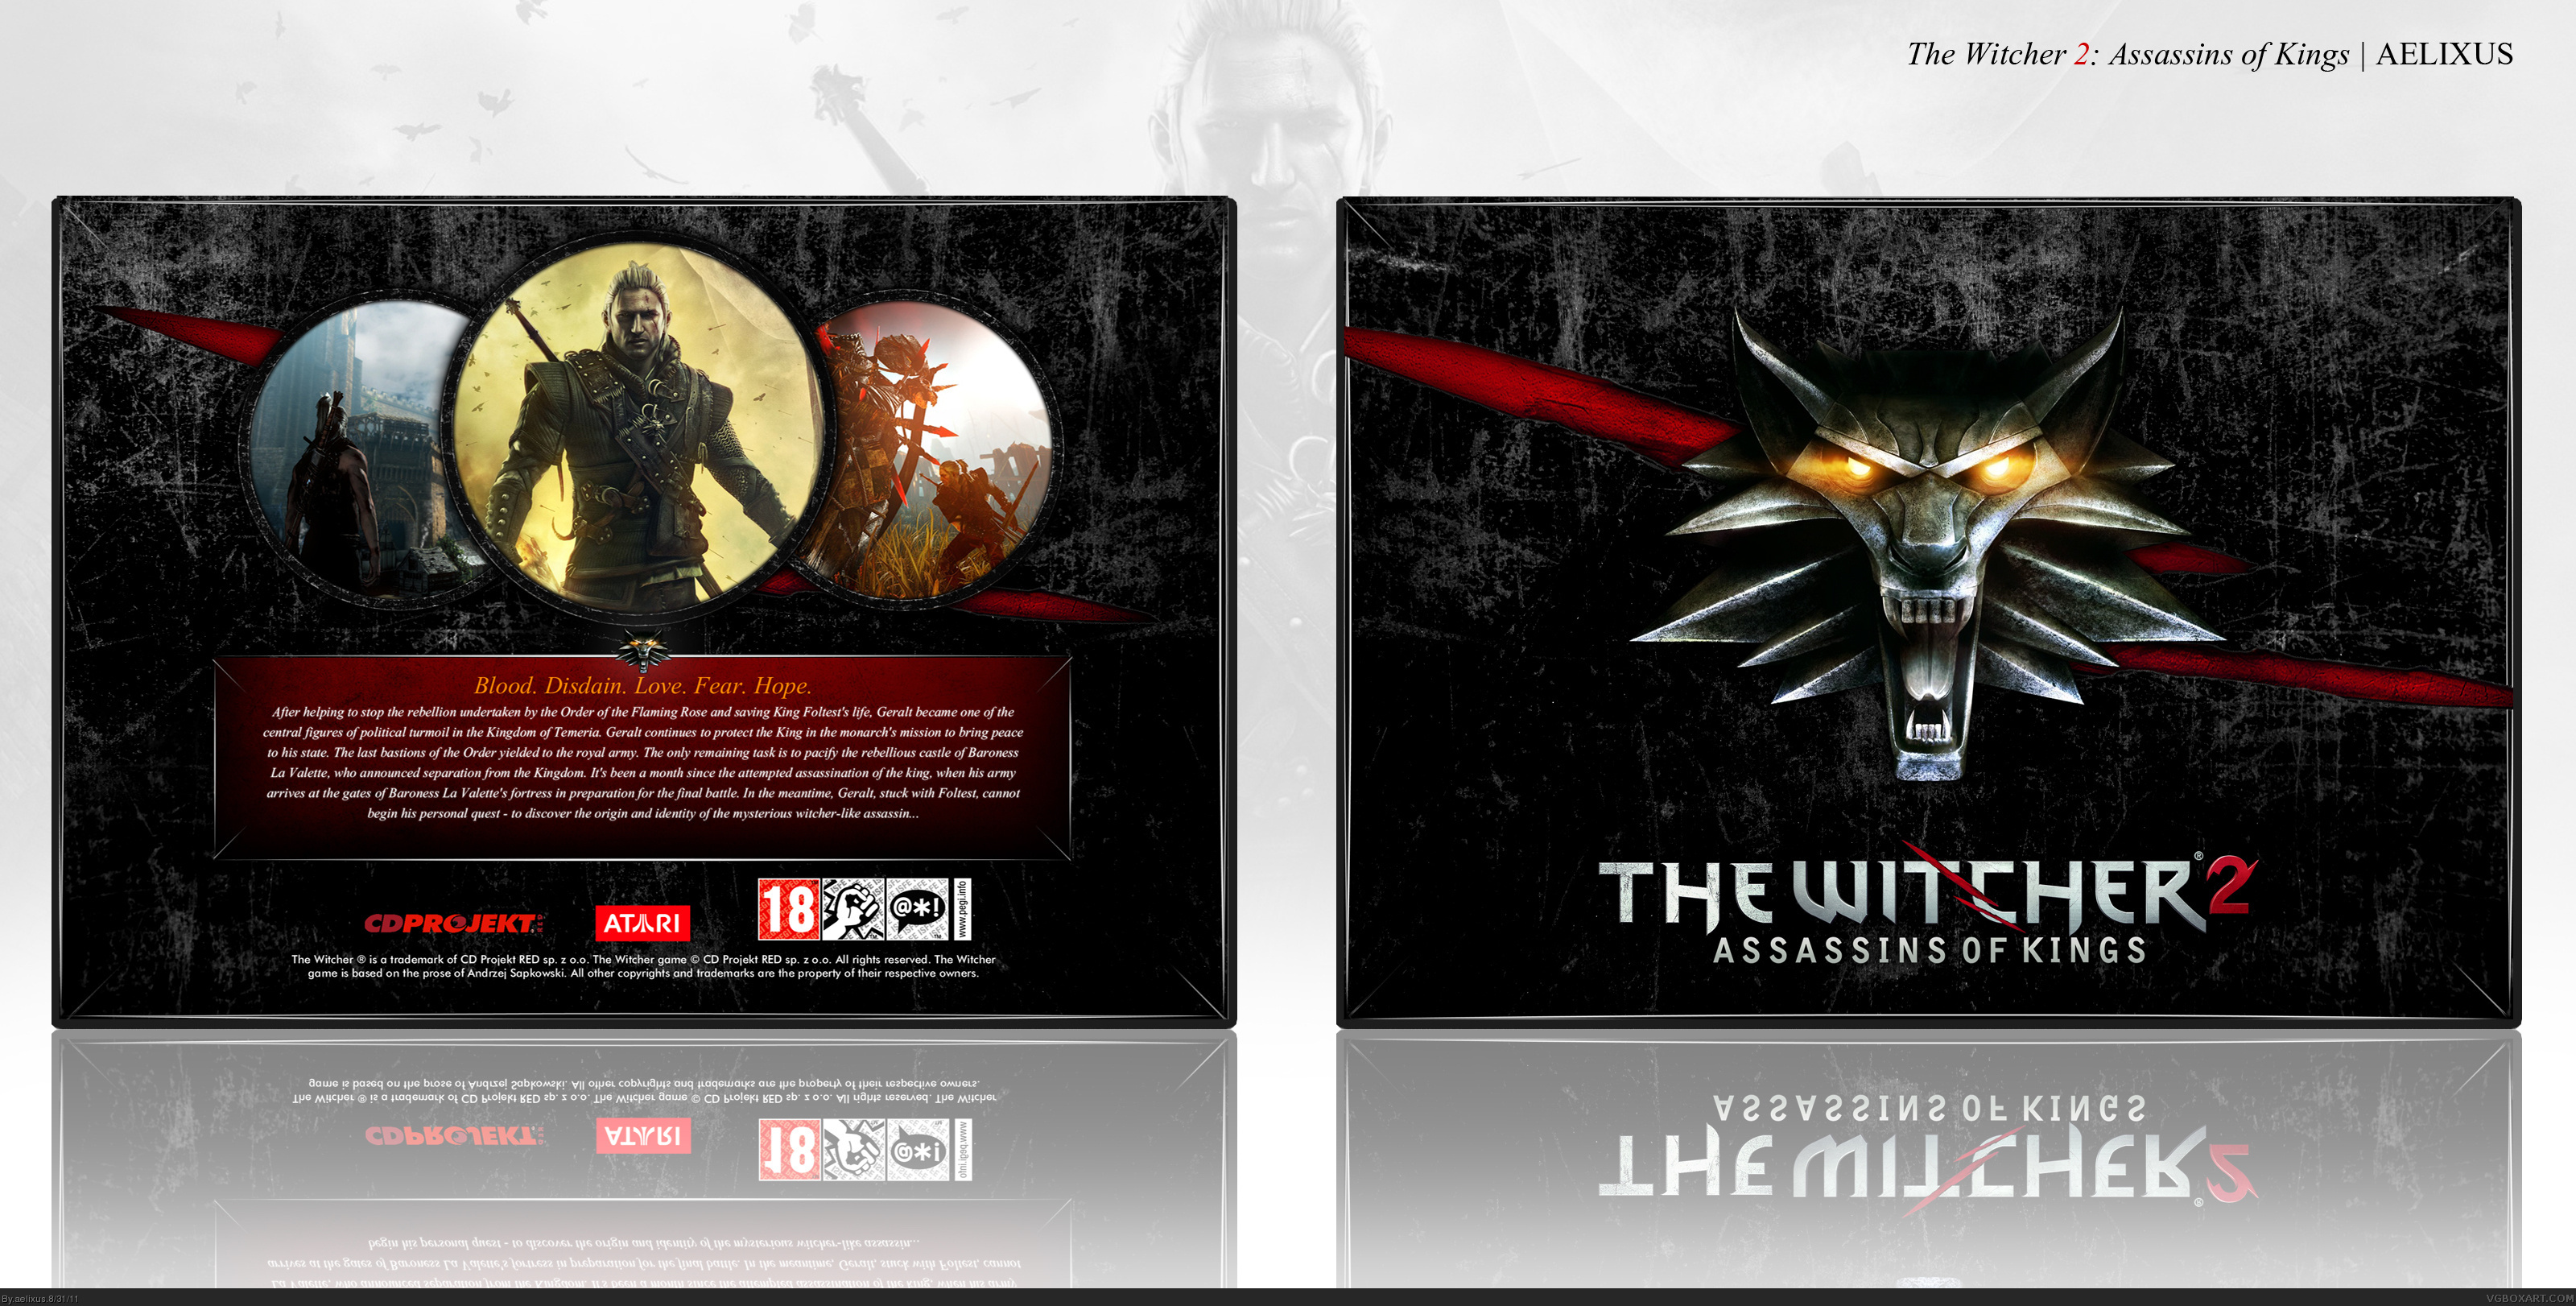 The Witcher 2: Assassins of Kings box cover